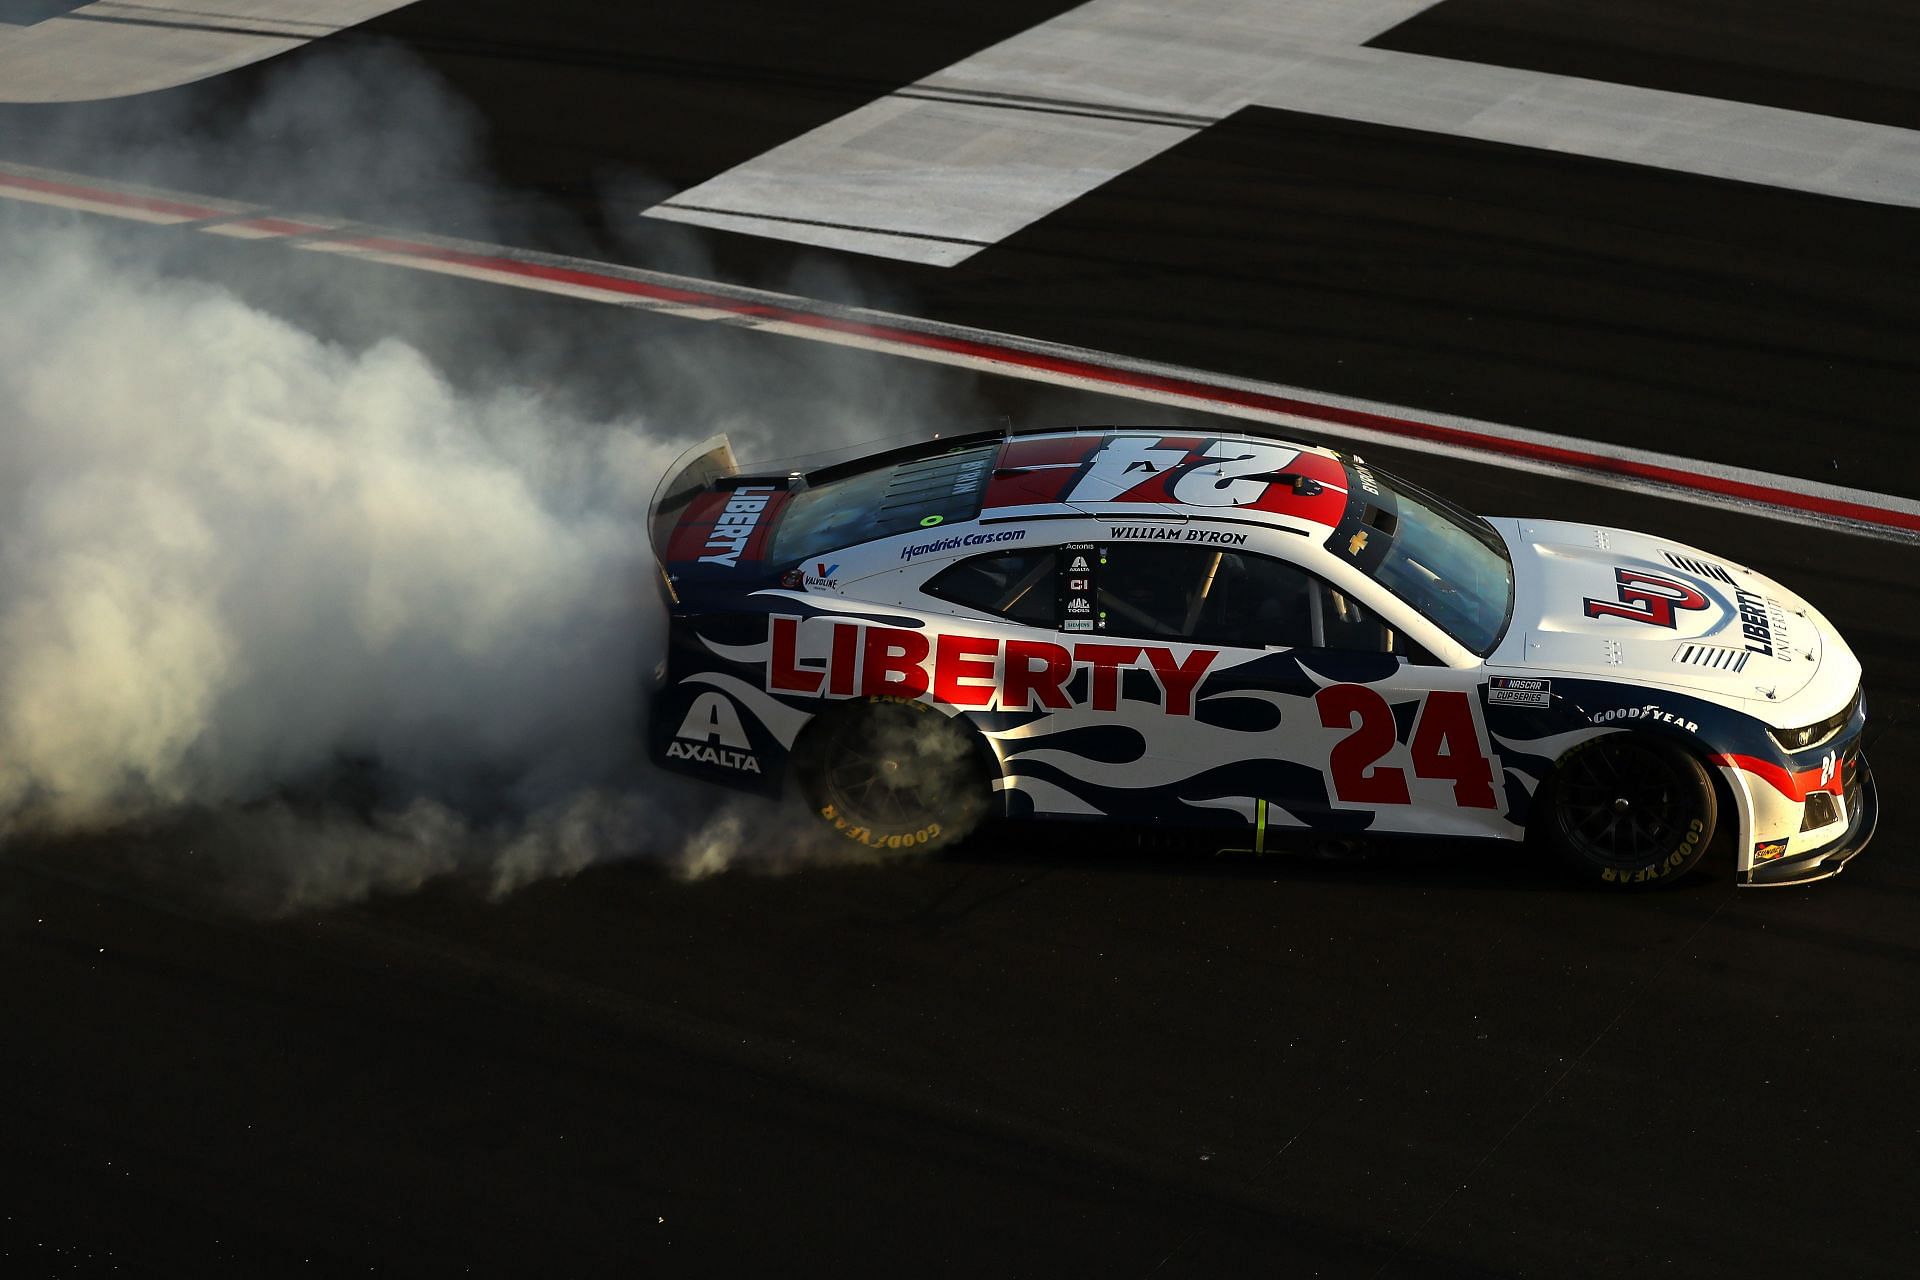 William Byron celebrates with a burnout after winning the NASCAR Cup Series Folds of Honor QuikTrip 500 at Atlanta Motor Speedway (Photo by Mike Mulholland/Getty Images)